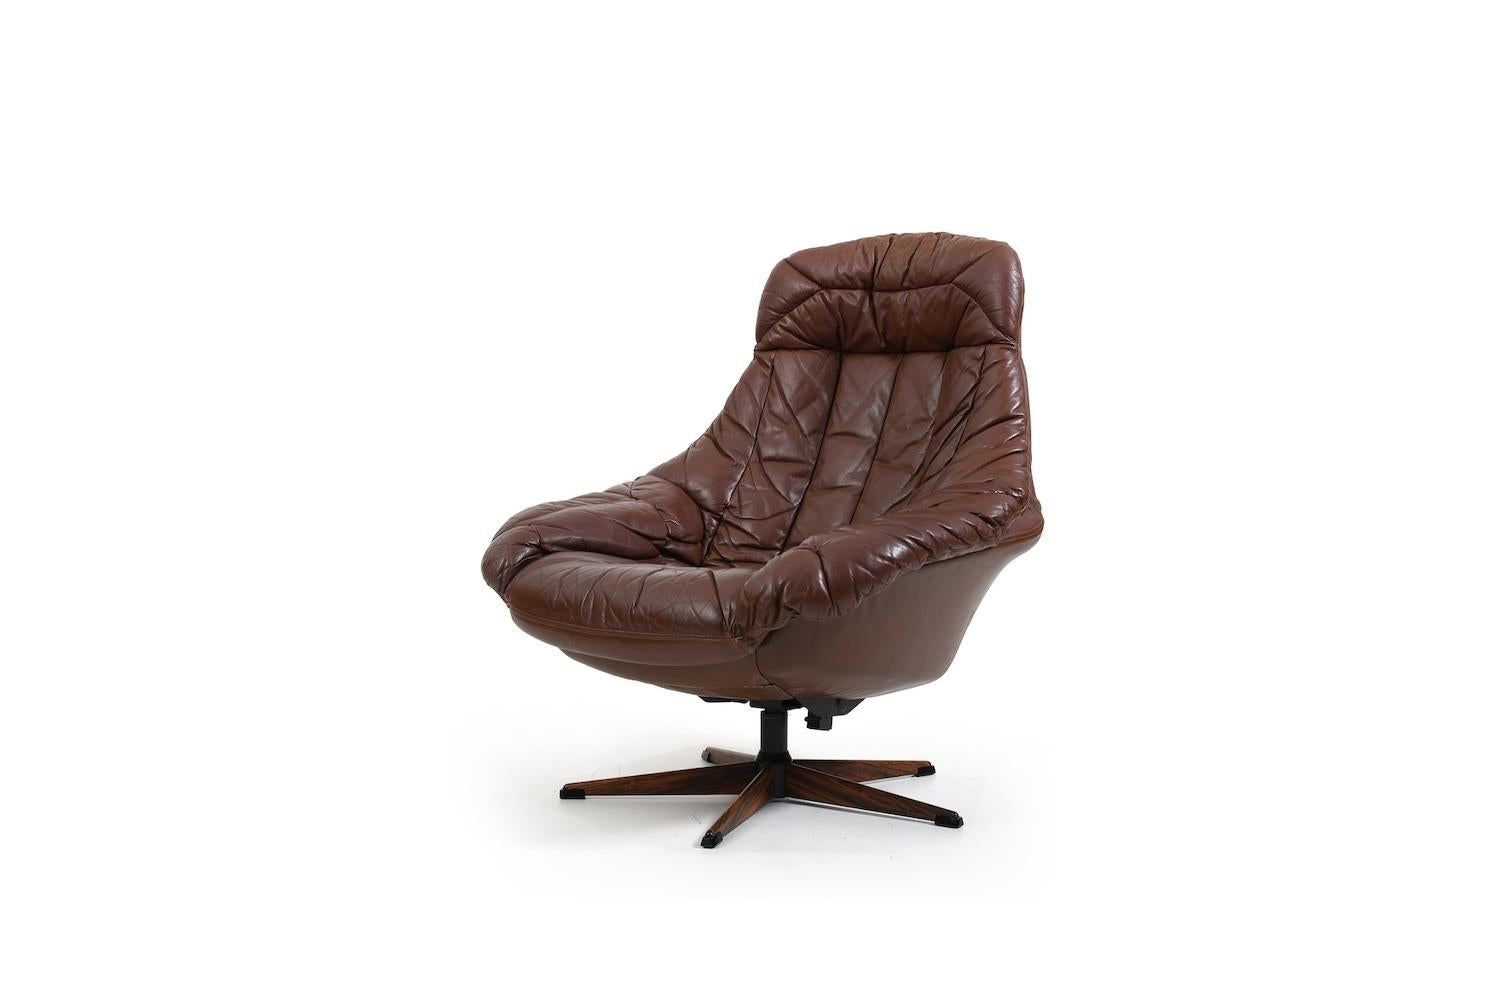 20th Century Henry W. Klein Leather Swivel Lounge Chair 1960s For Sale